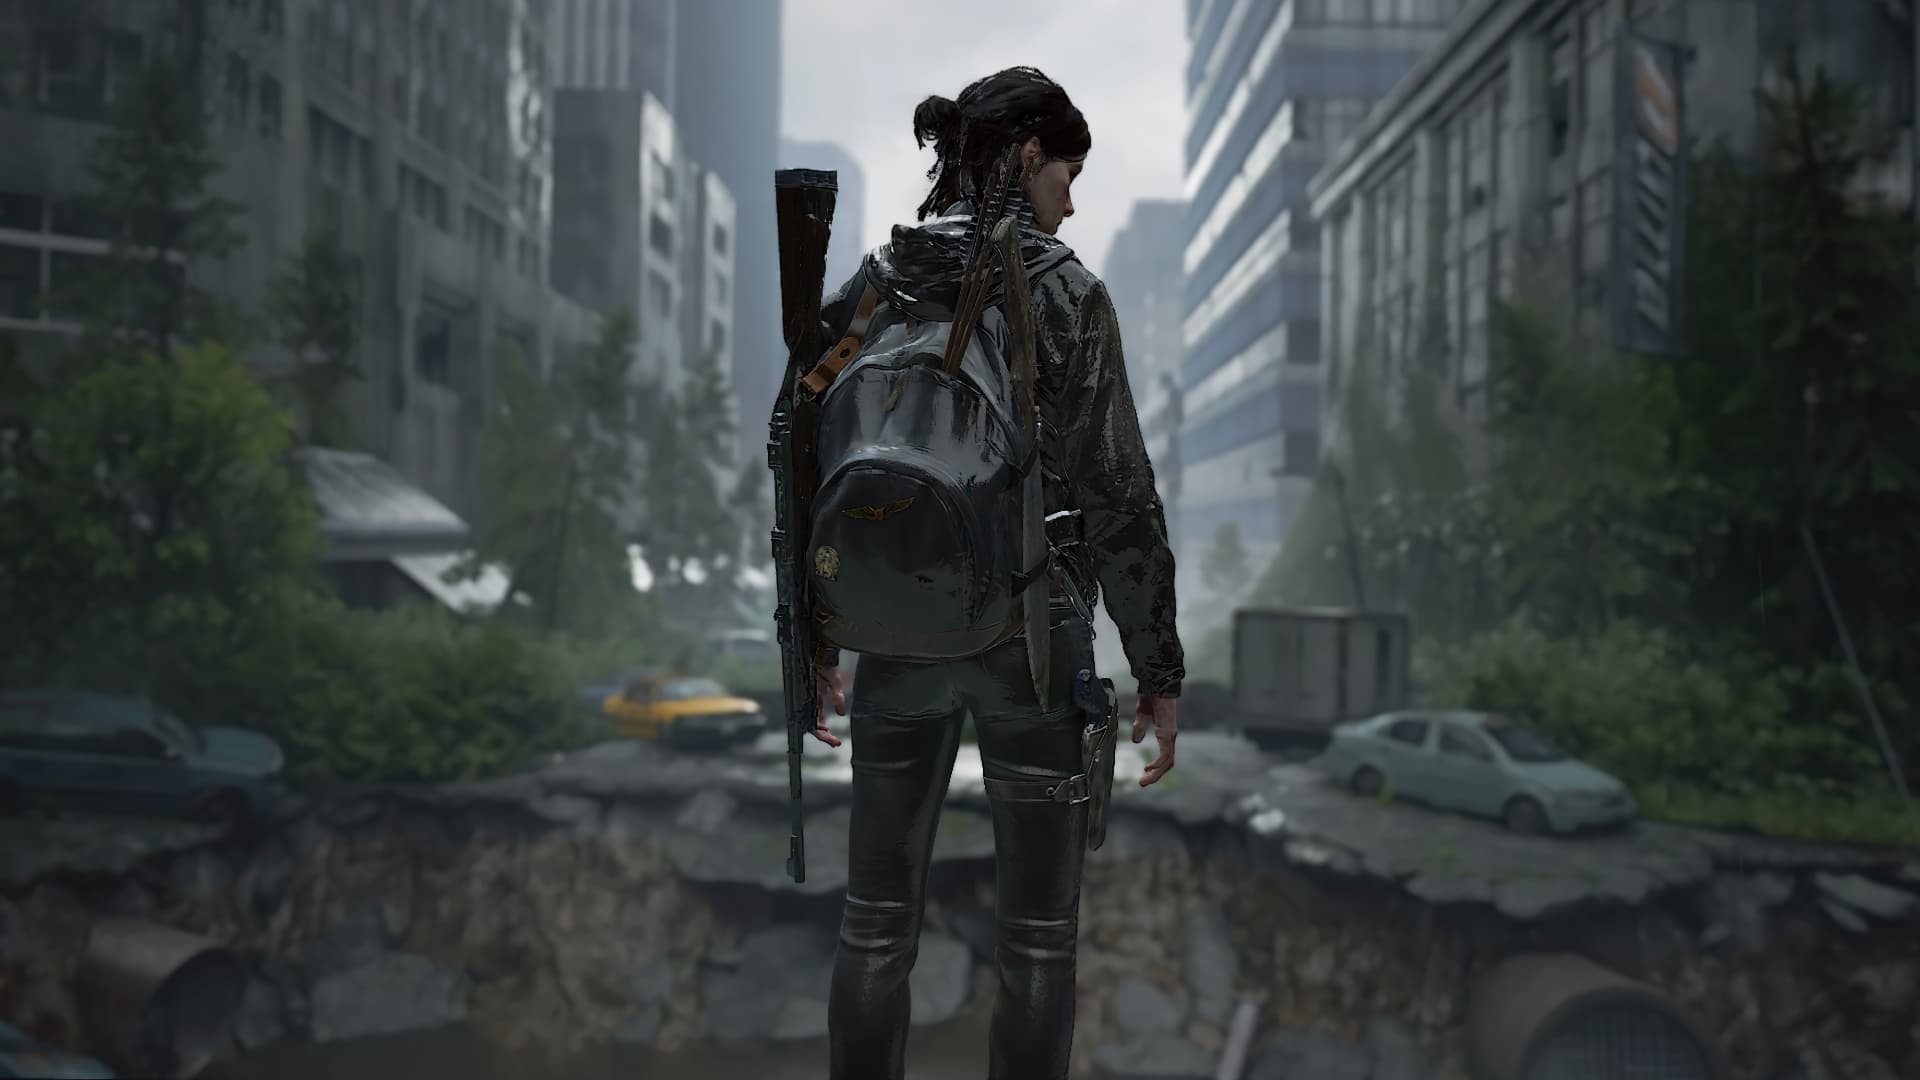 The Last of Us Season 2: What Game It Will Cover, Cast, and